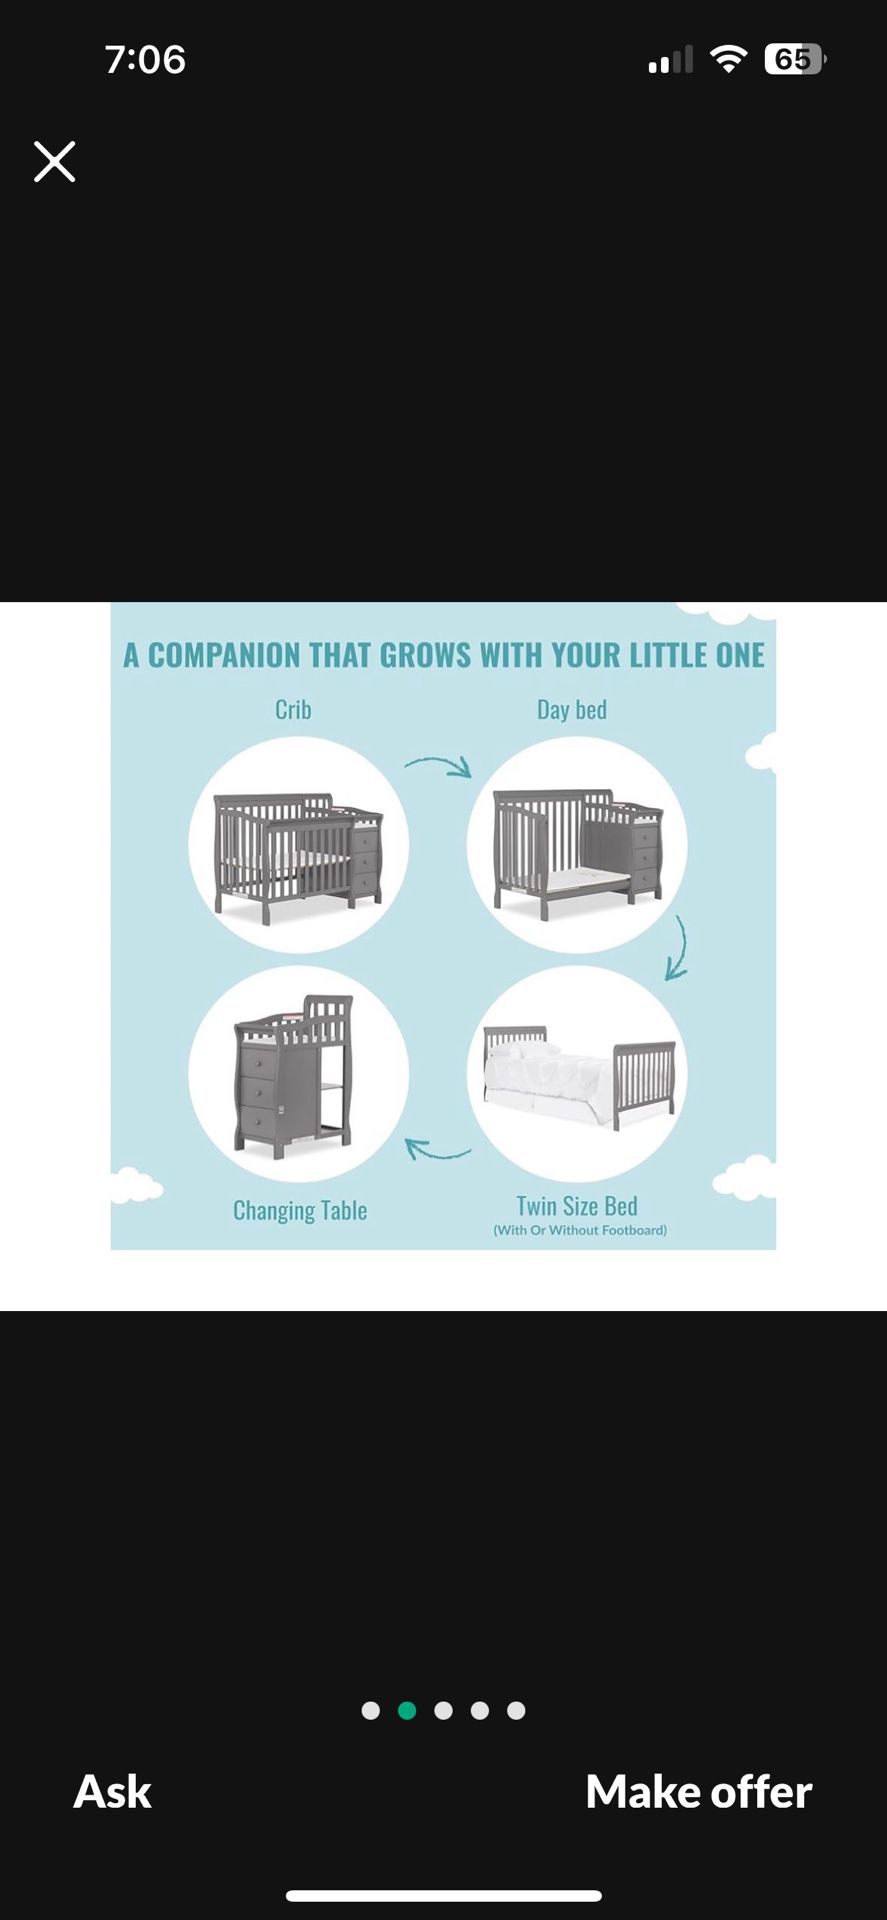 Mini crib with changing table